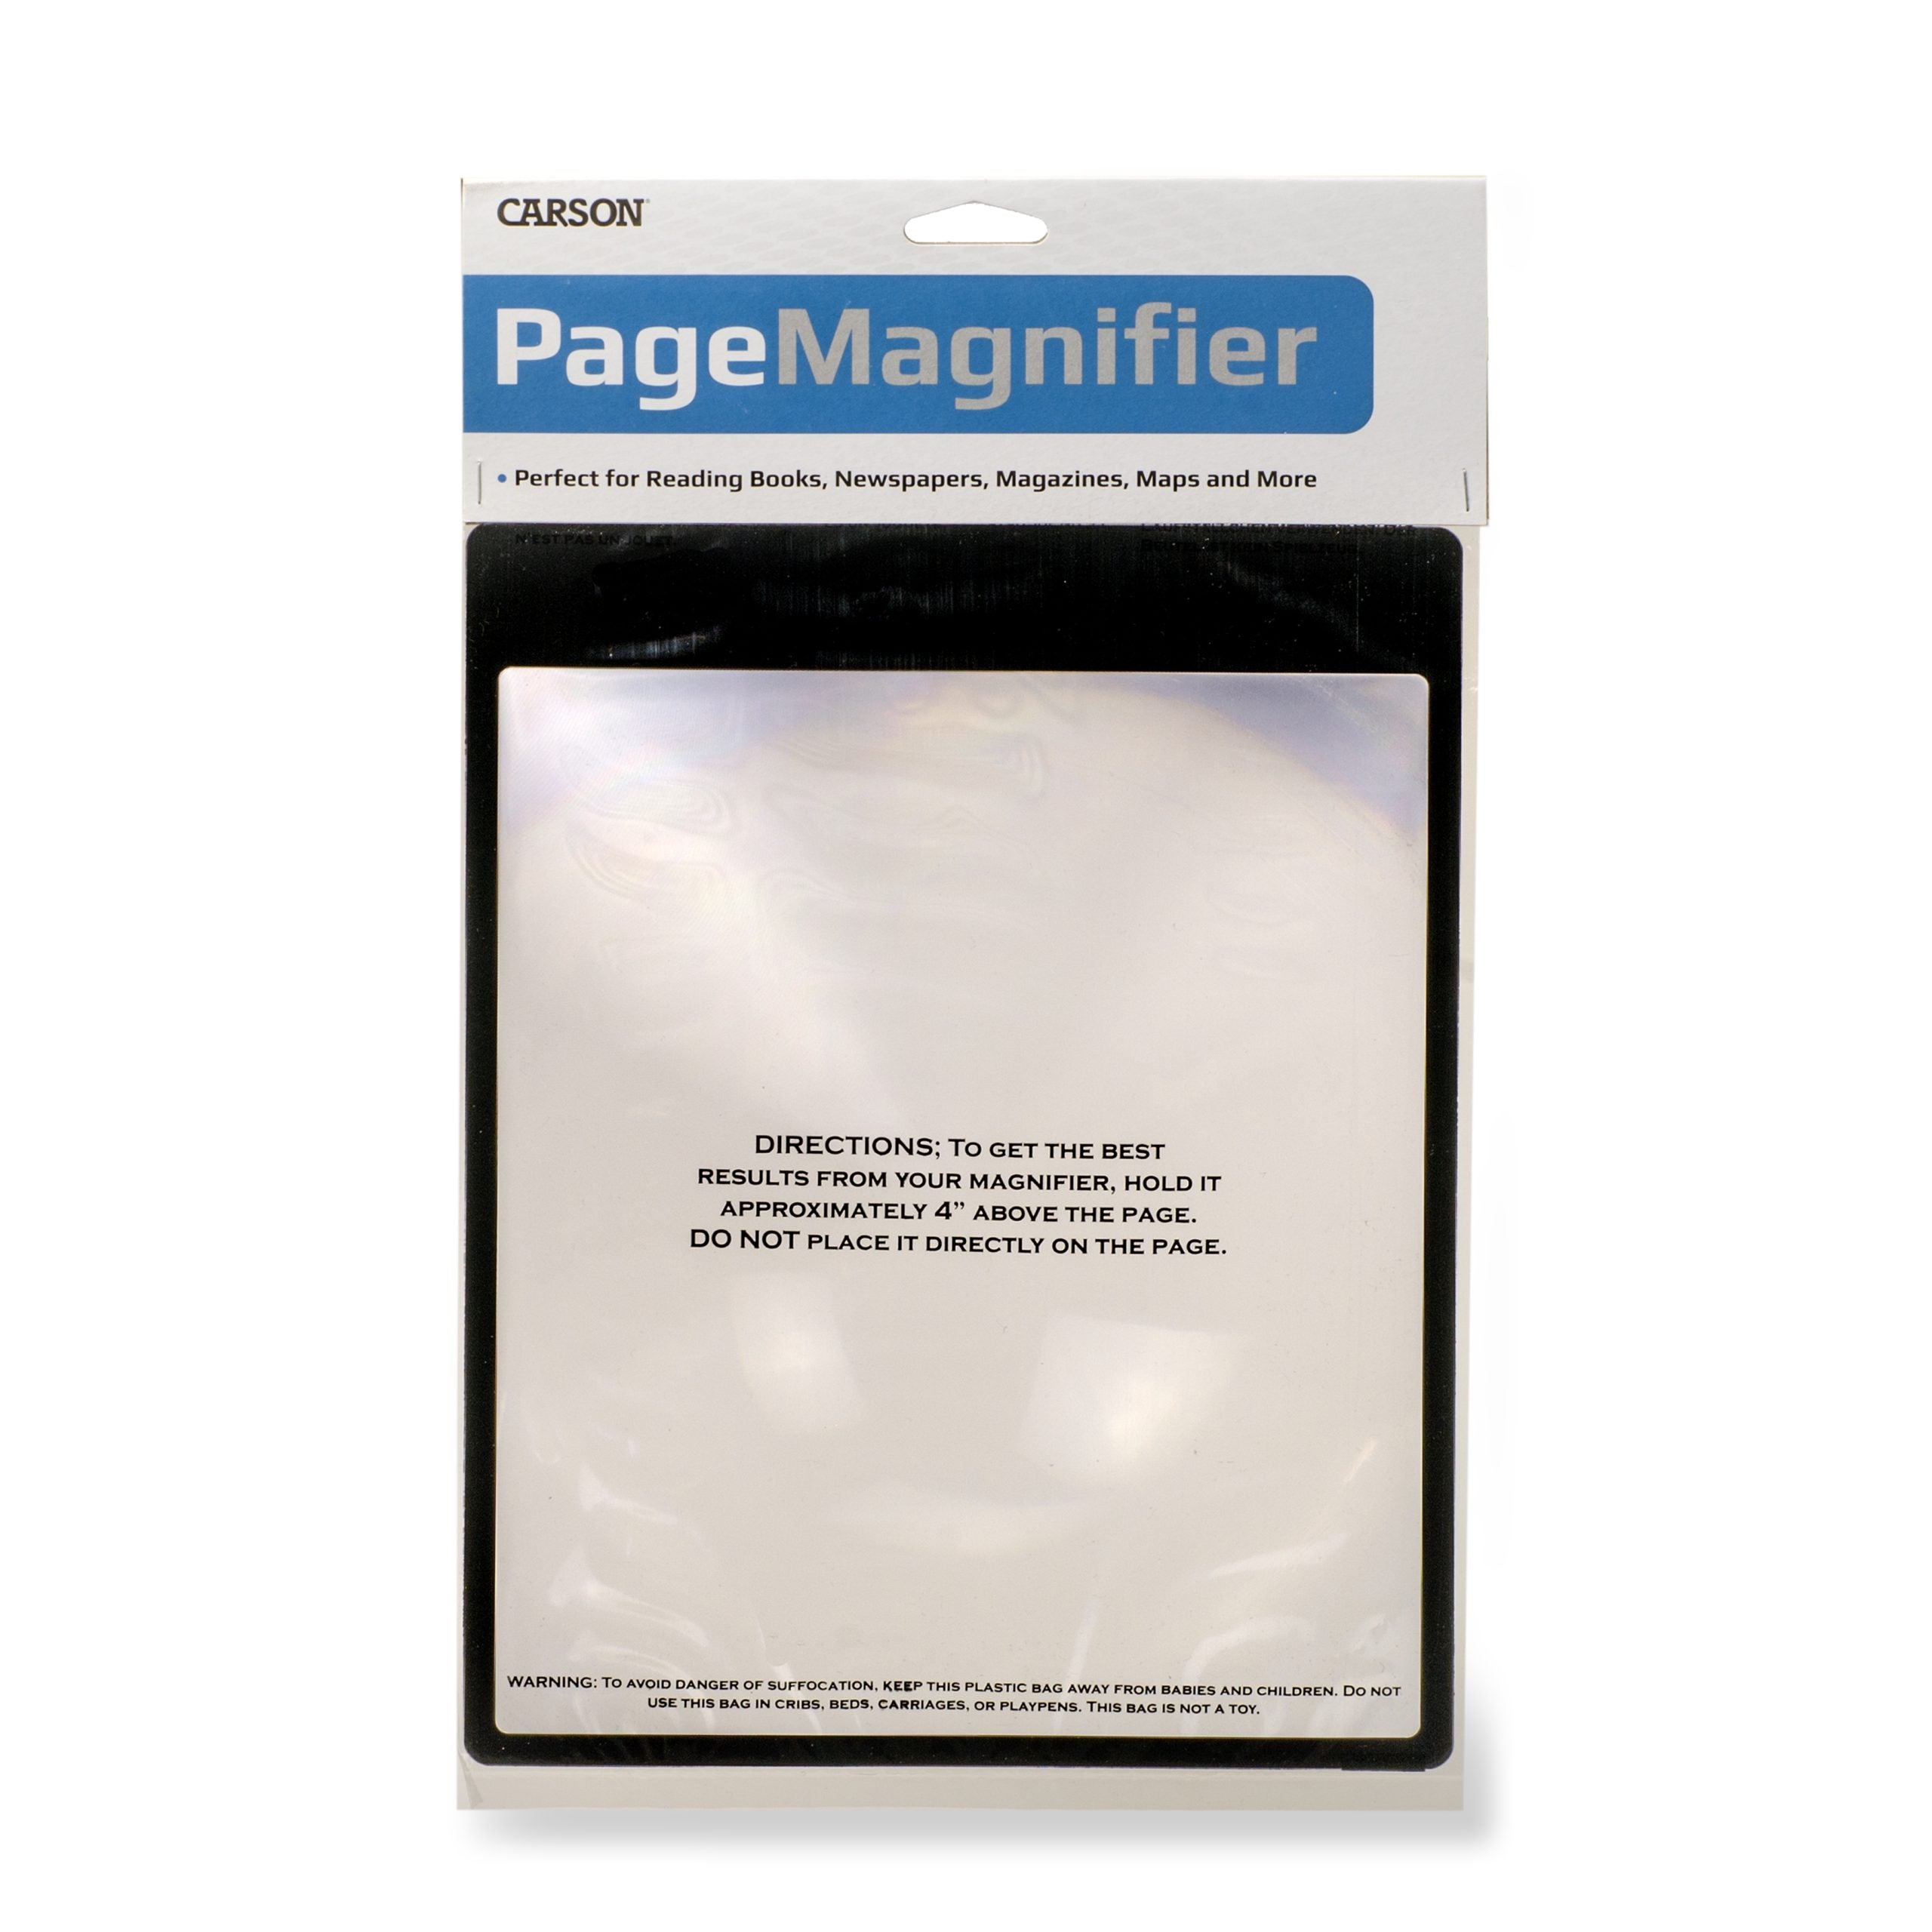 MagniSheet 2x Power Flexible Fresnel Page Magnifier